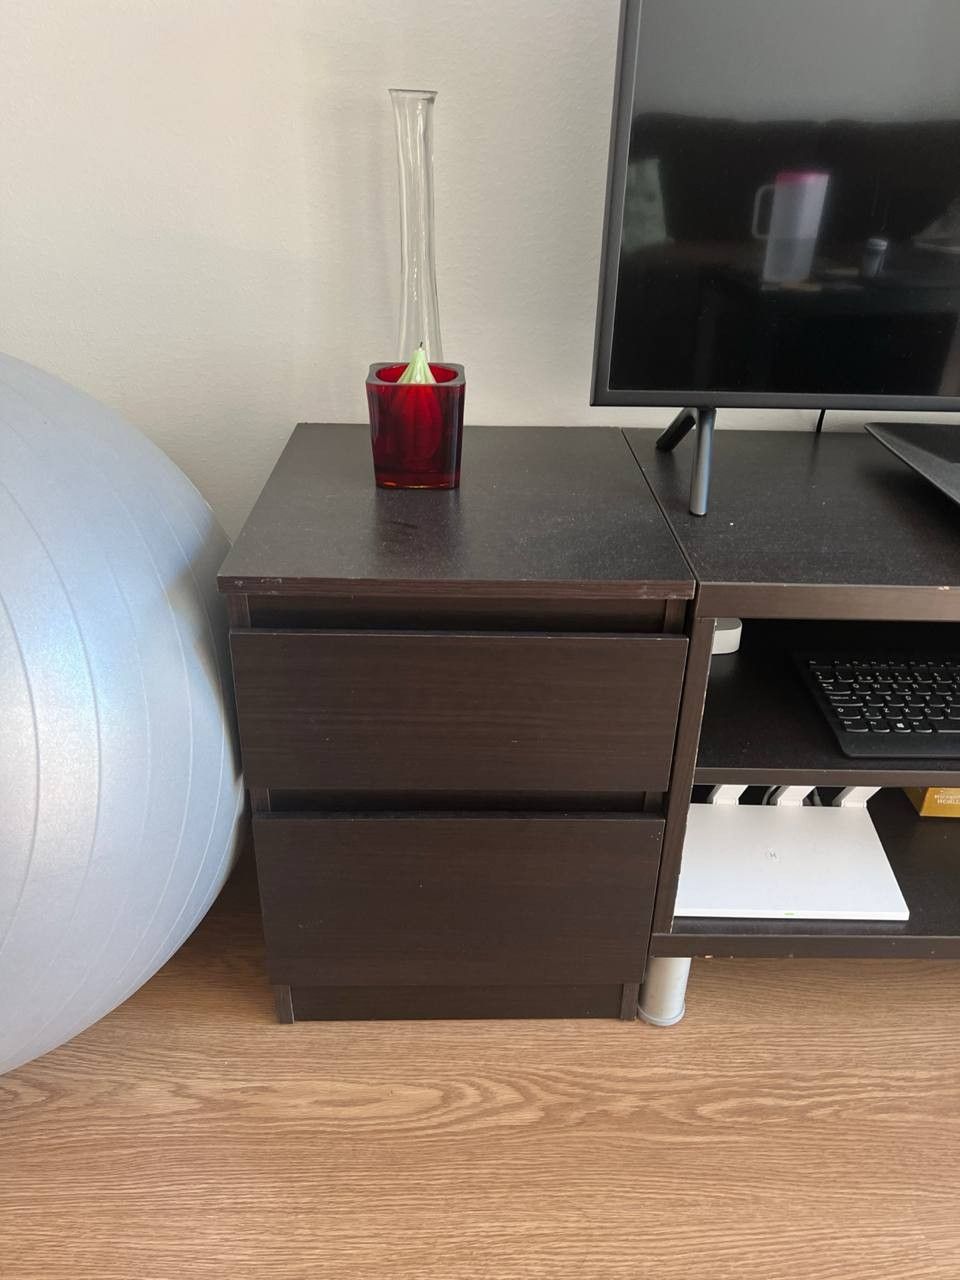 Chest of drawers or bed side table